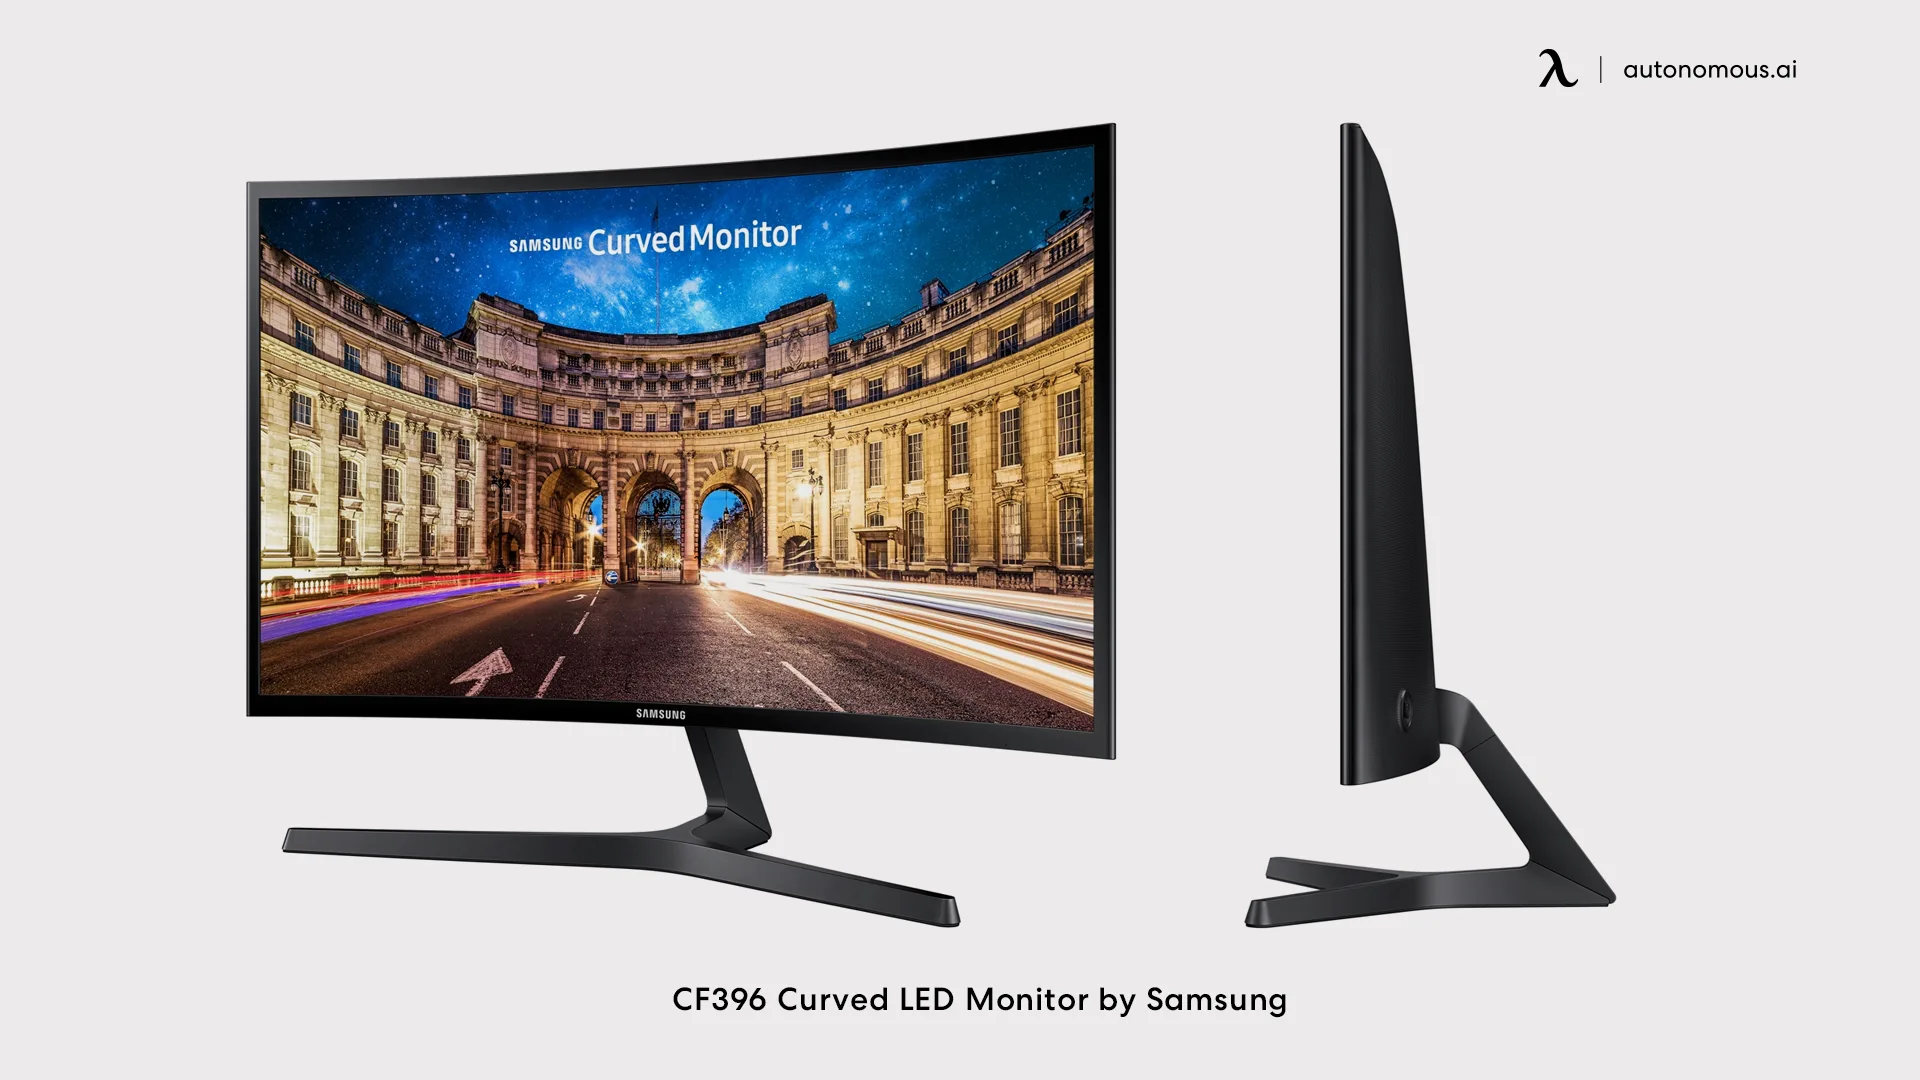 CF396 Curved LED Monitor by Samsung